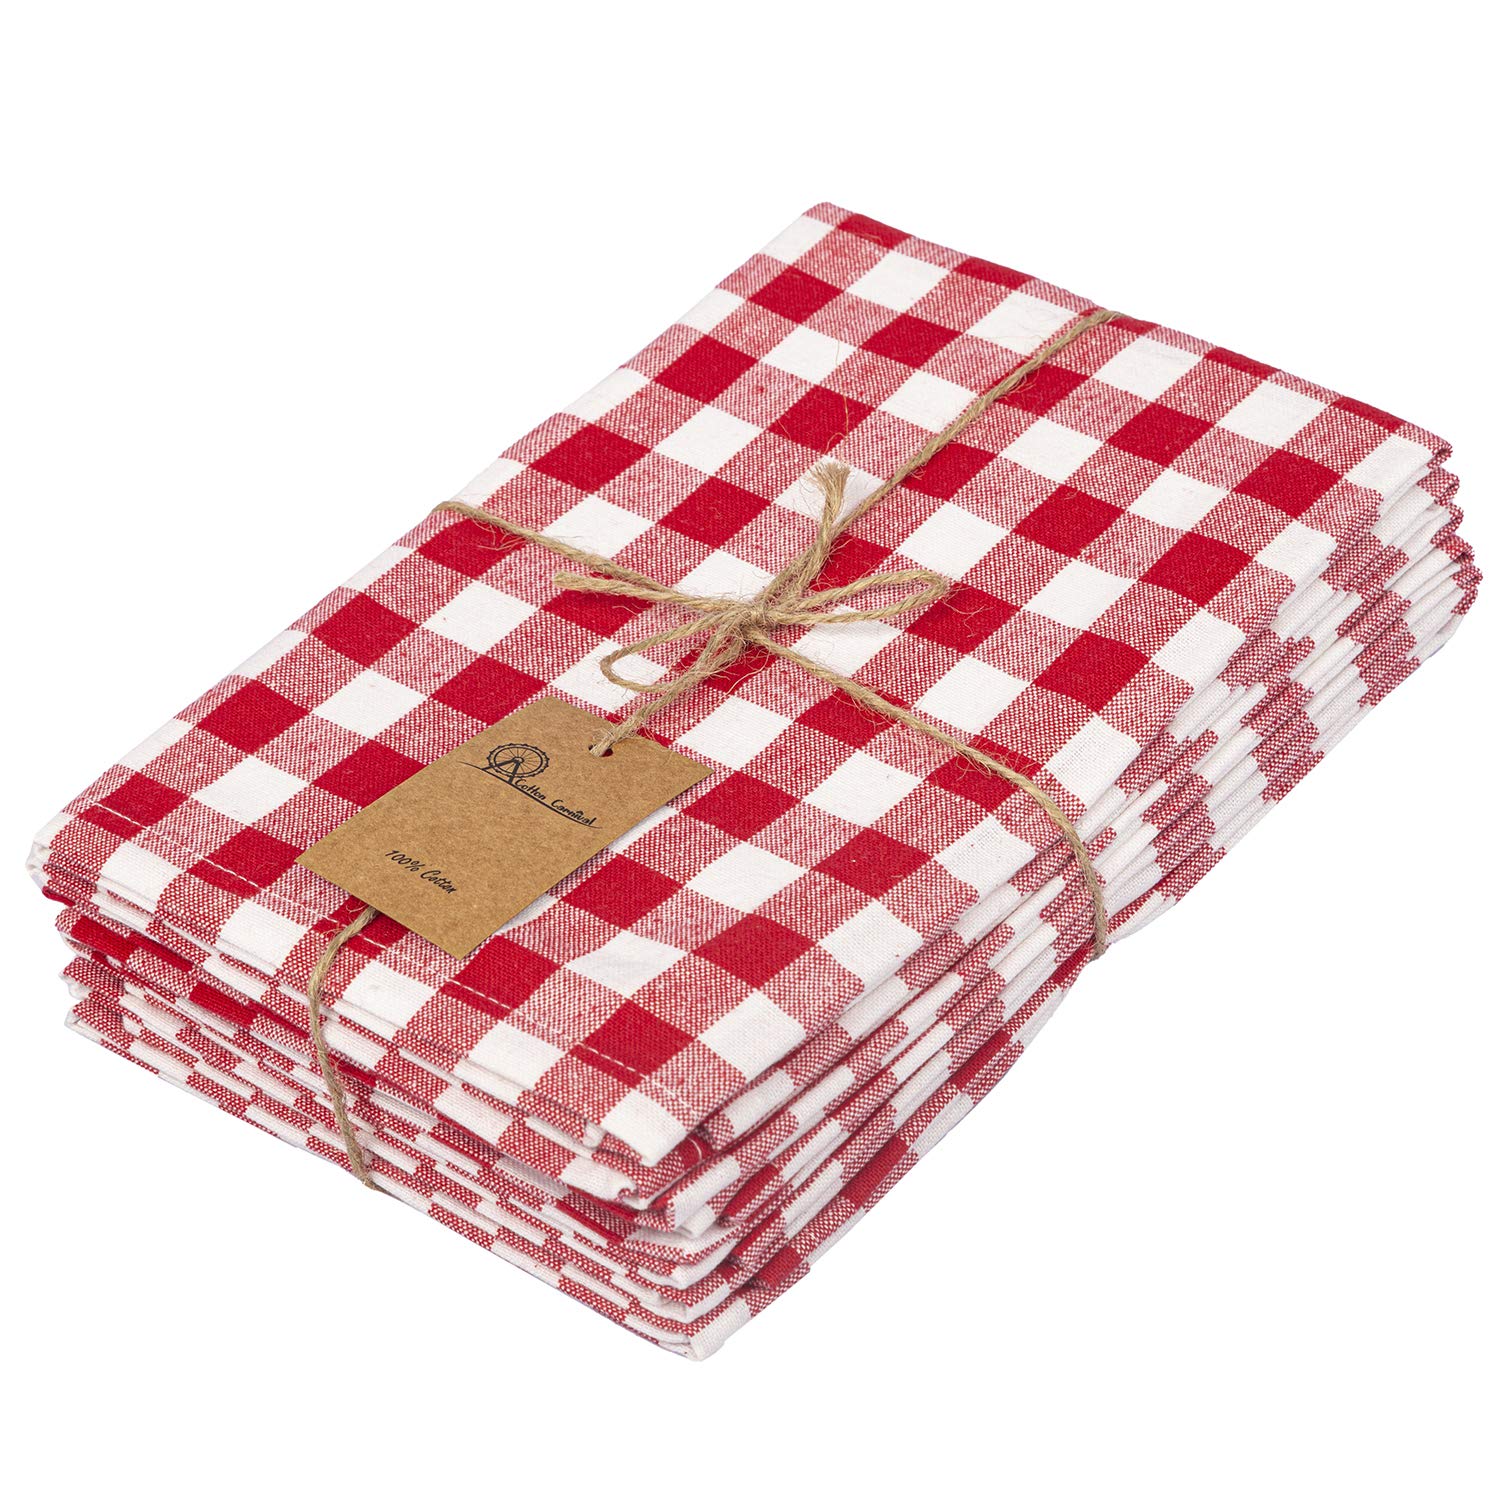 Cotton Carnival Dinner Napkins, 100% Ring Spun Cotton Plaid Tea Towels, Premium Quality, Mitered Corners, Super Absorbent Dish Towels, Pack of 6 17 X 17 in Red and White Gingham Checks